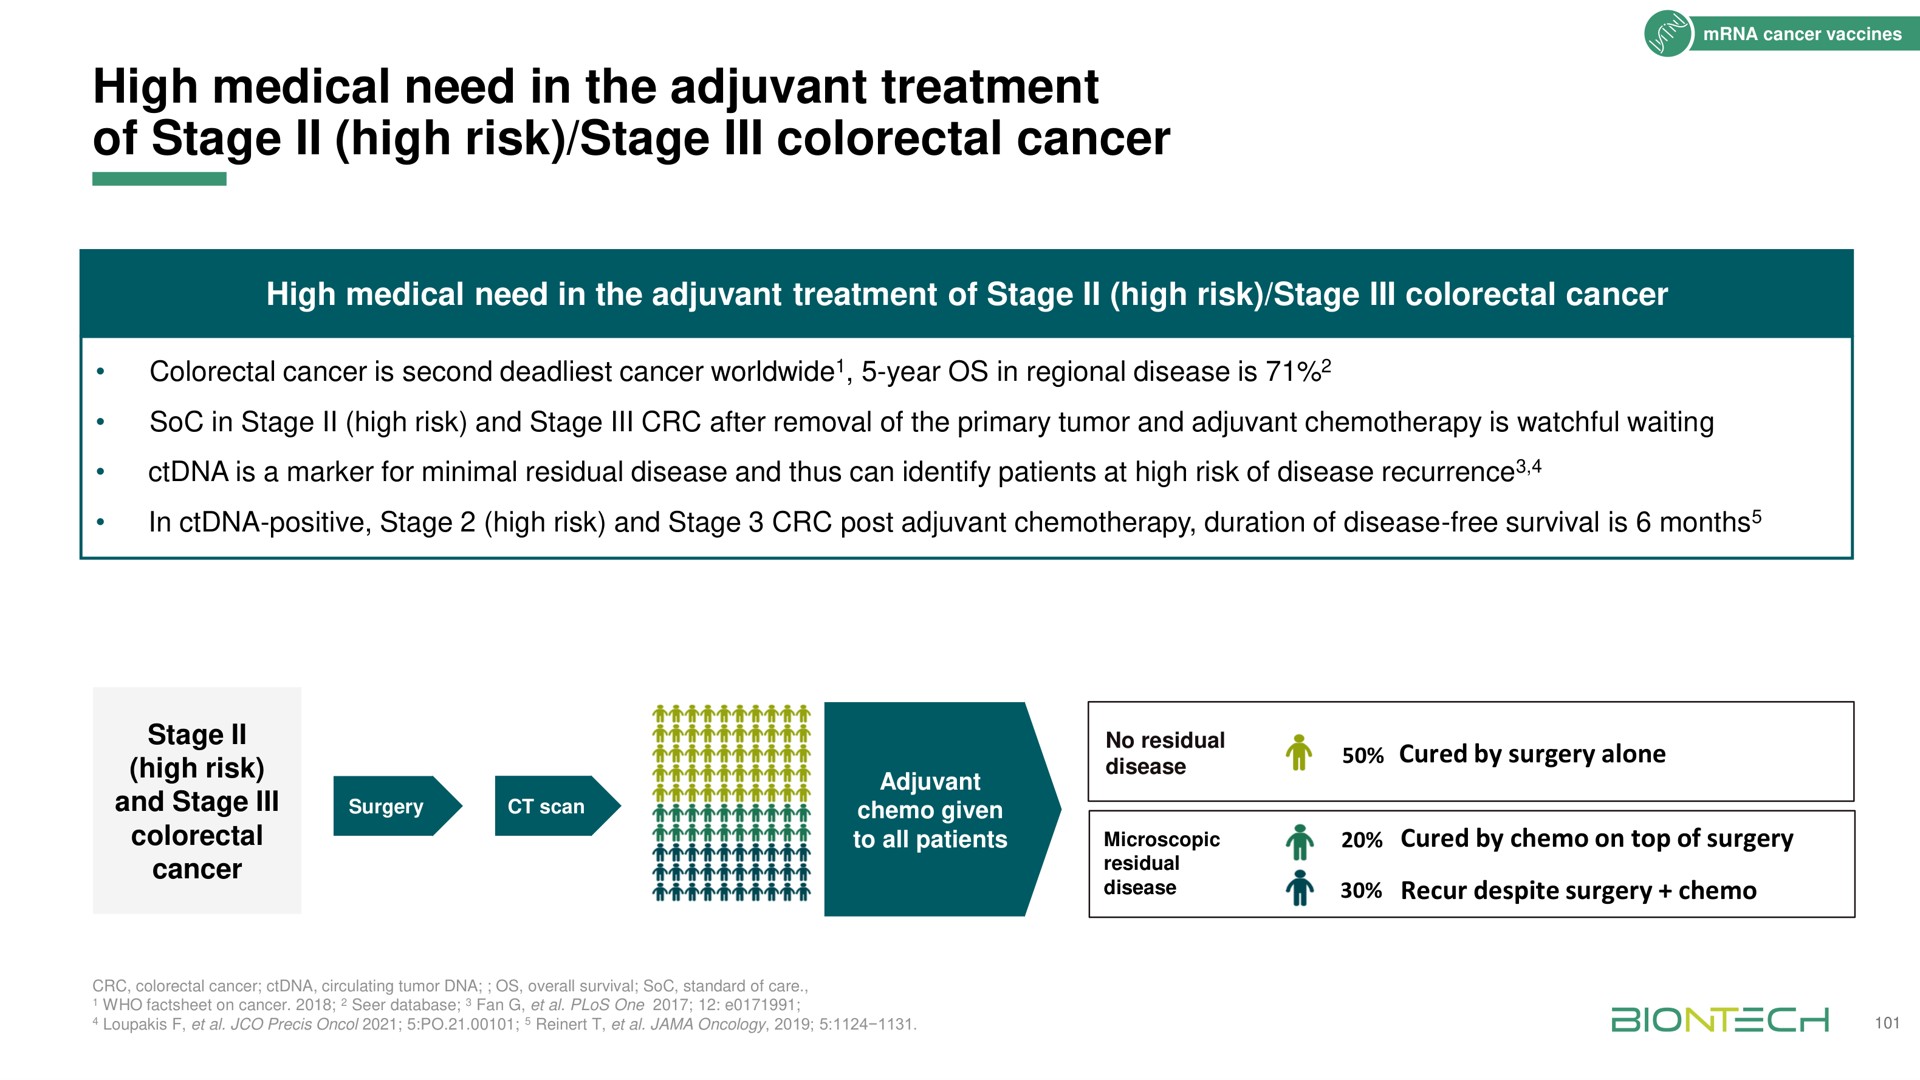 high medical need in the adjuvant treatment of stage high risk stage cancer ill | BioNTech